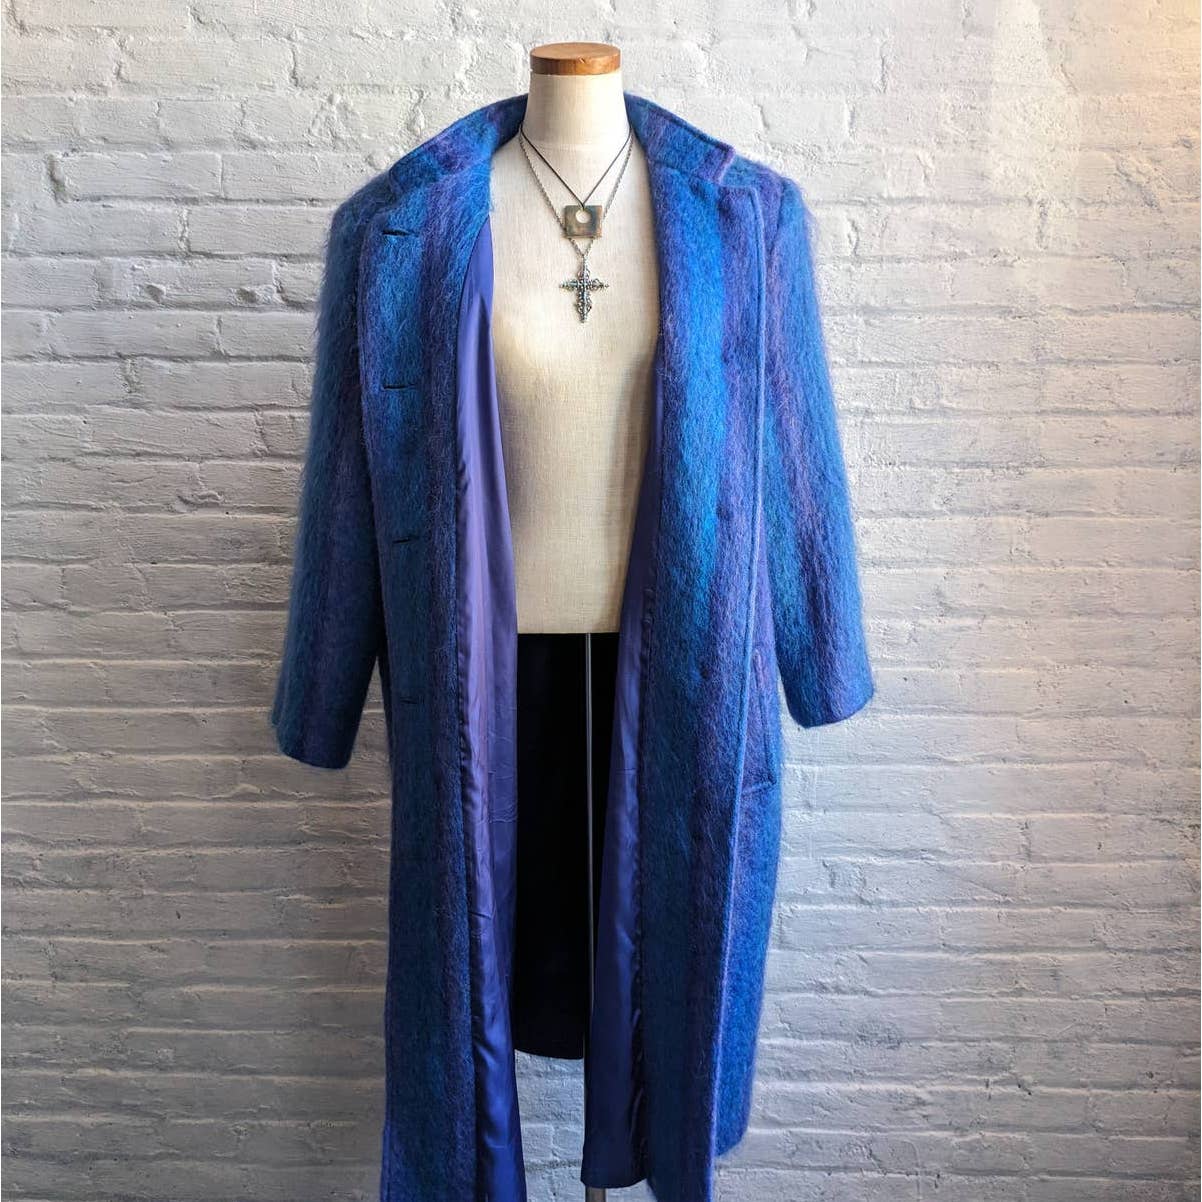 90s Vintage Blue Striped Mohair Wool Trench Coat Funky Shaggy Fuzzy Furry Jacket